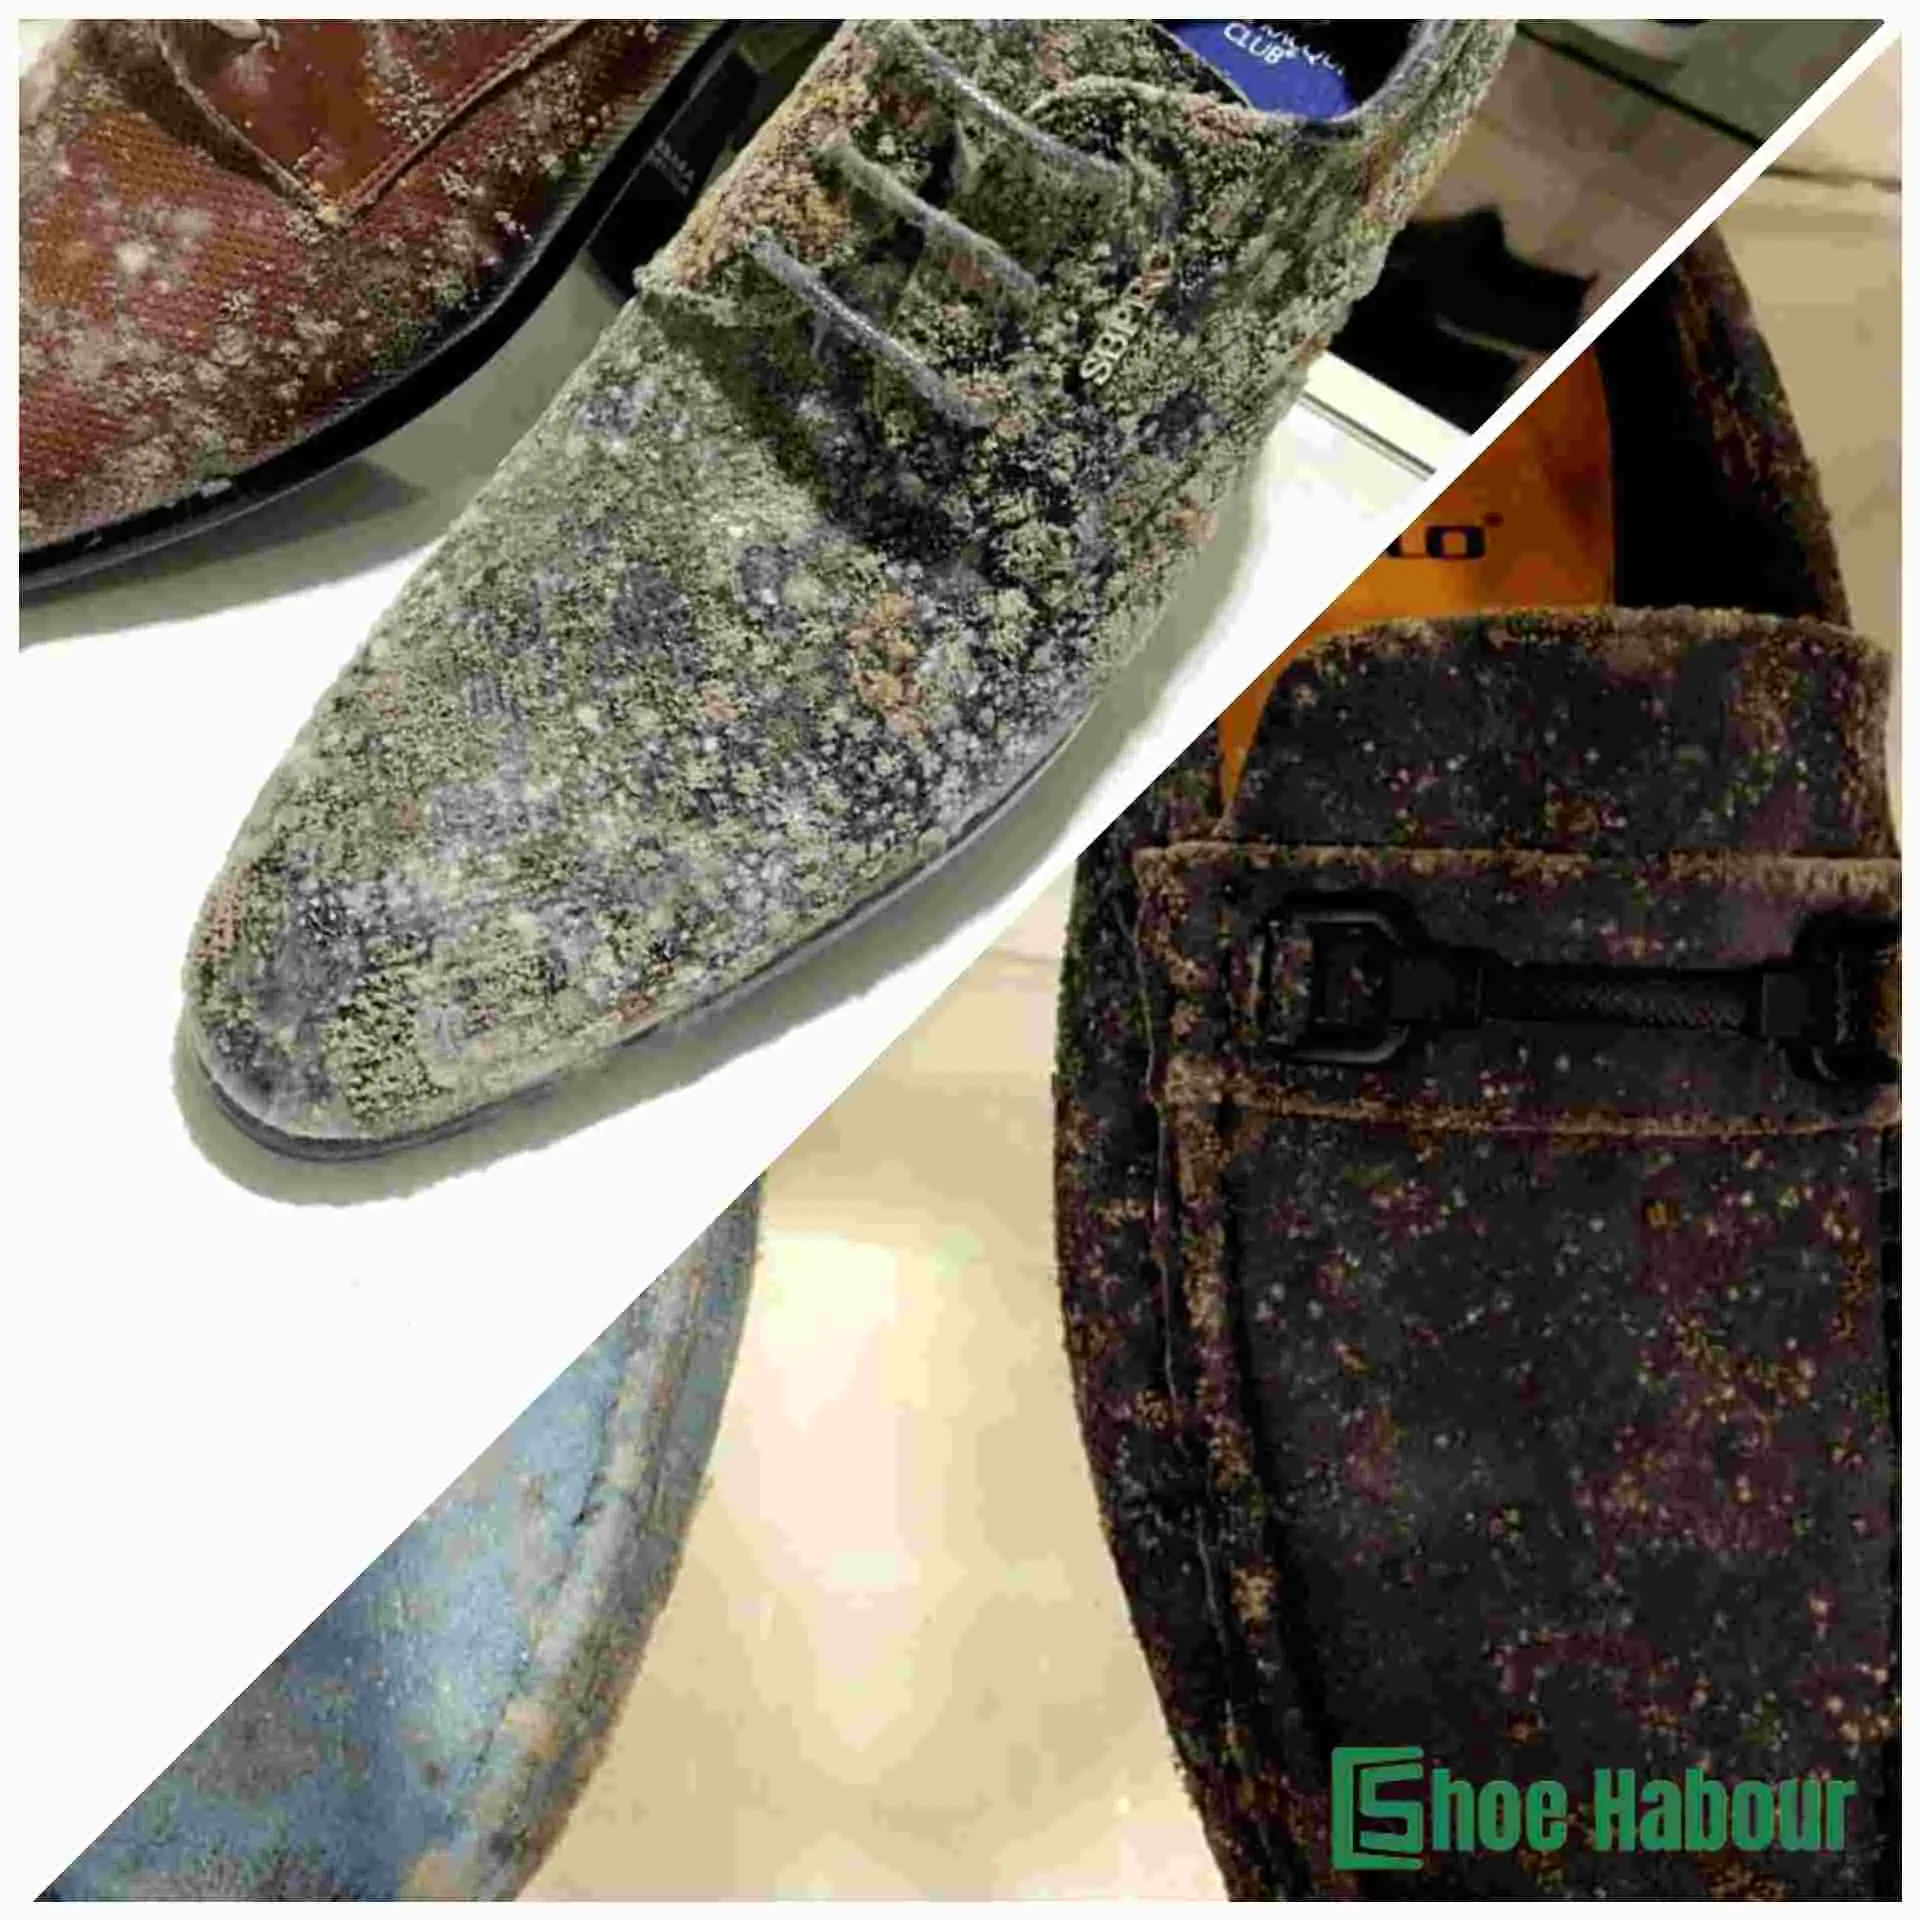 Shoes with mold